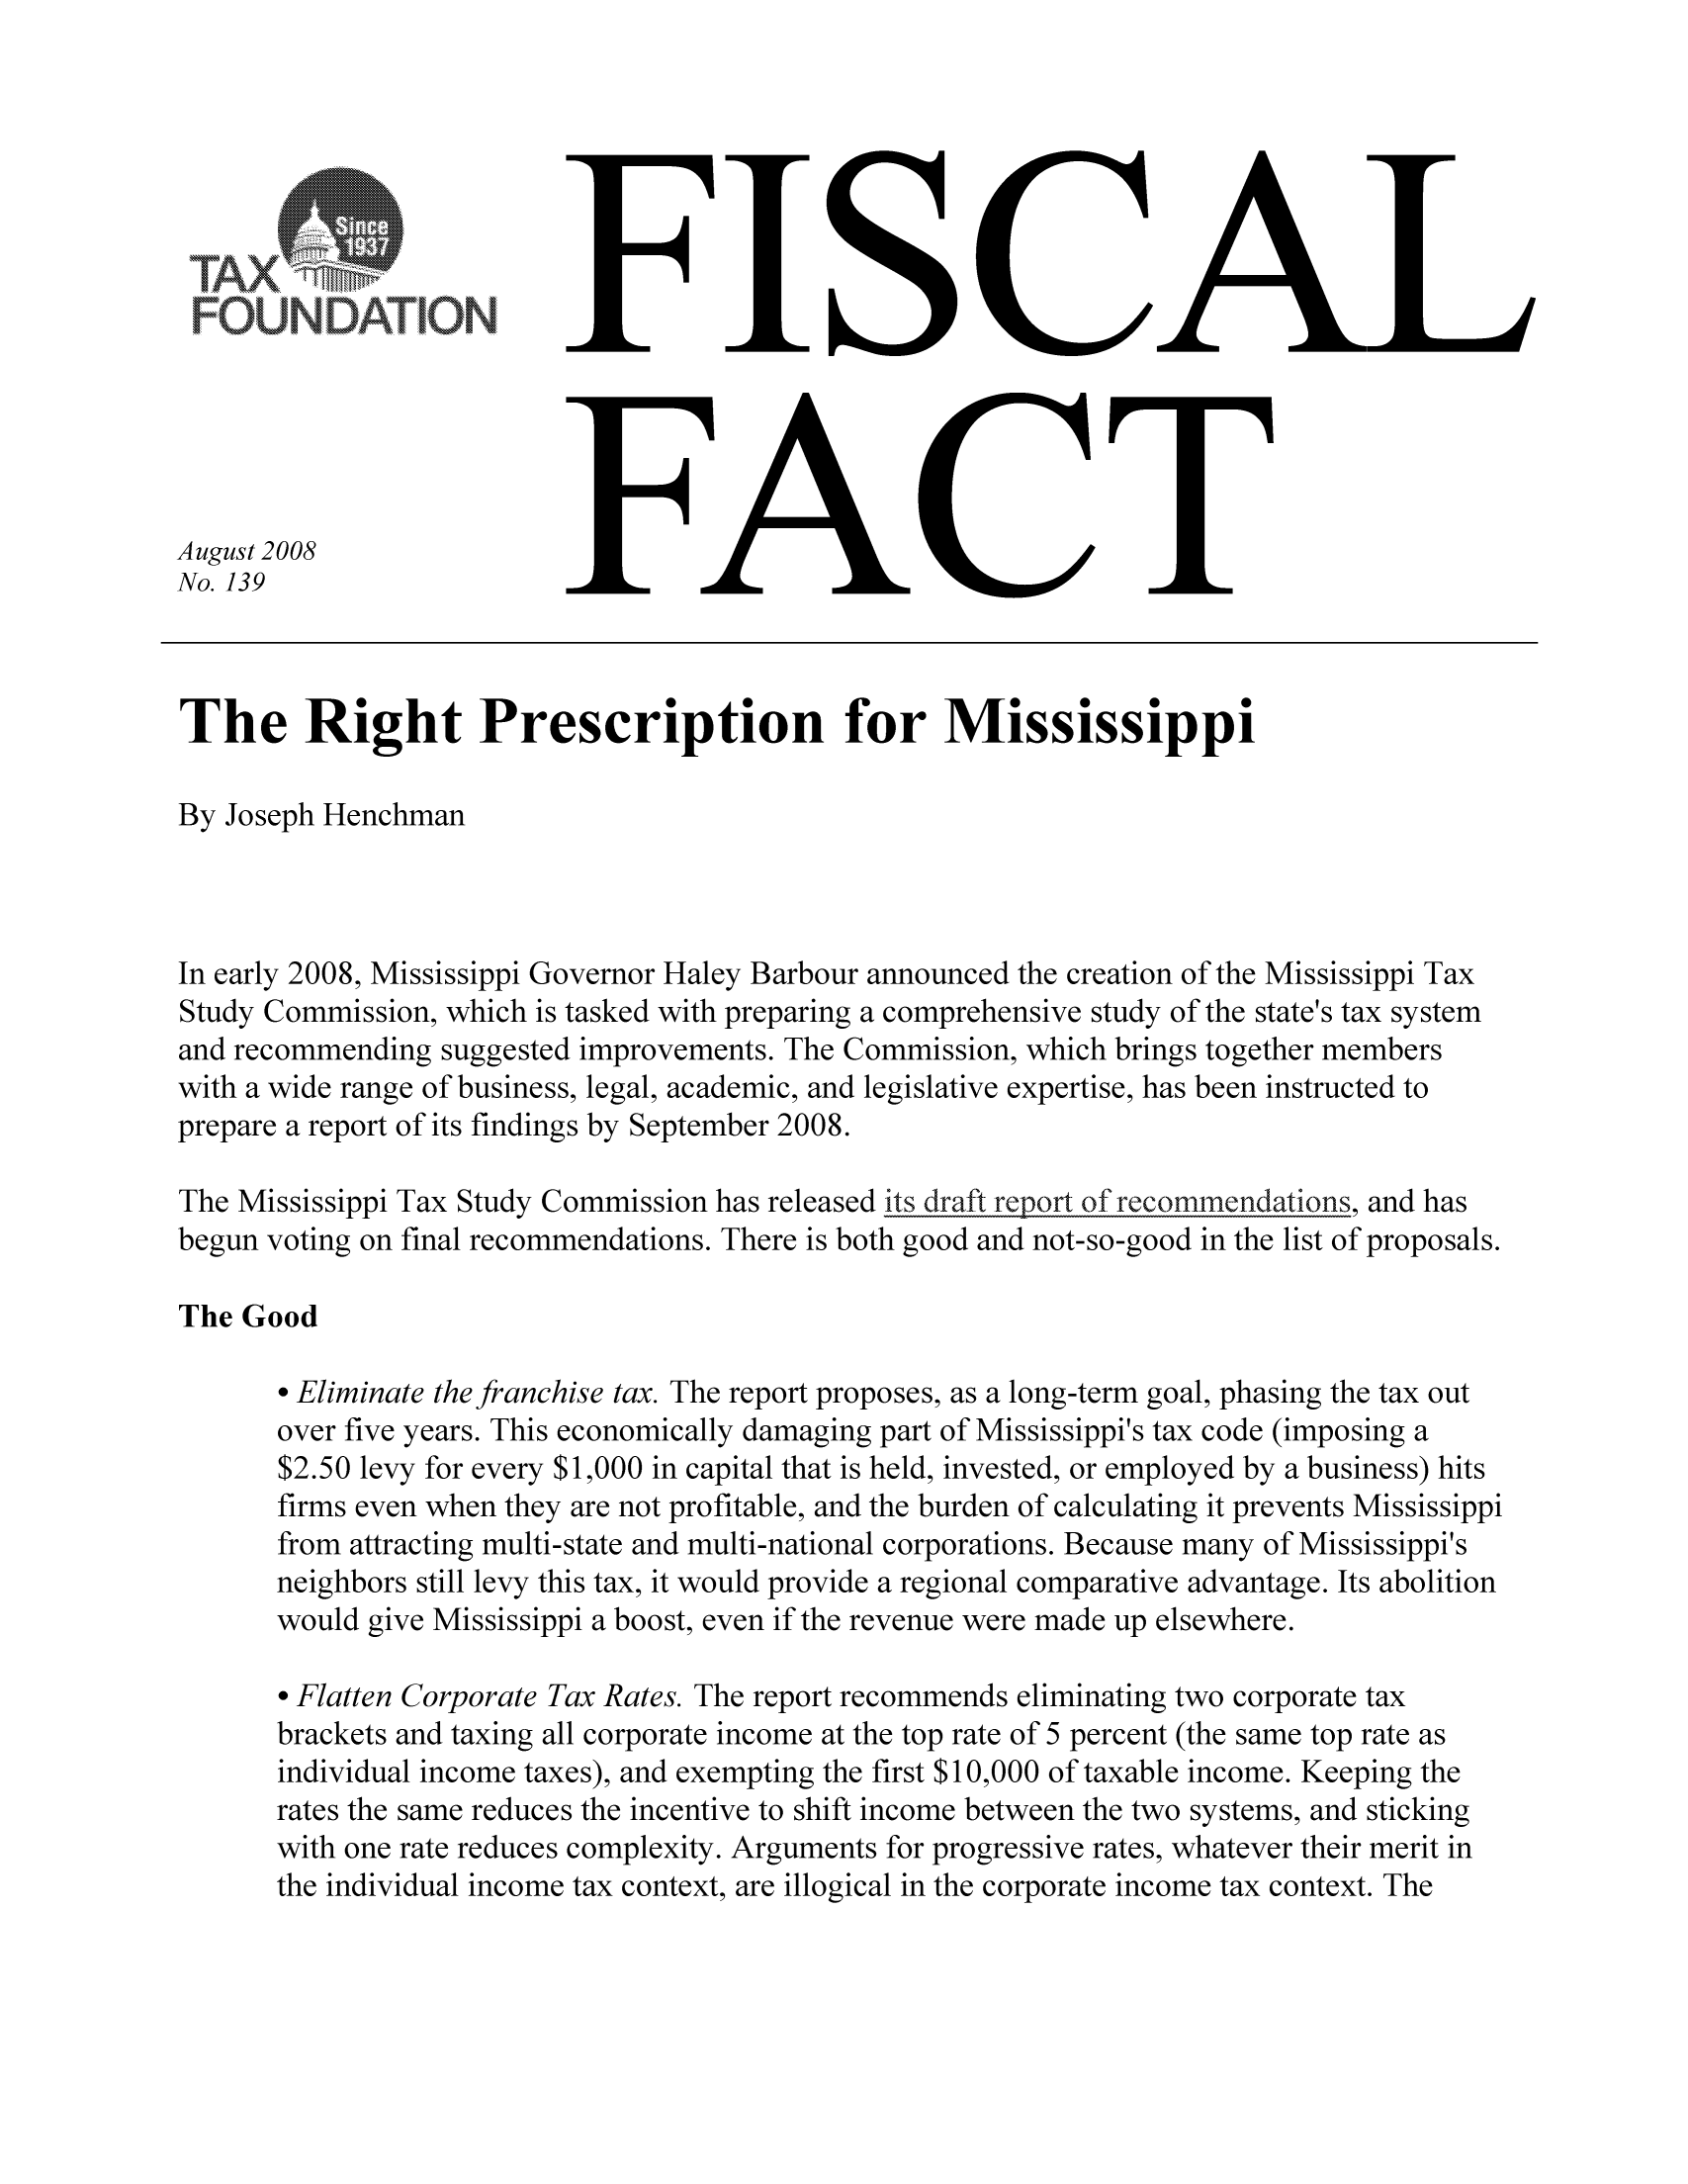 handle is hein.taxfoundation/ffbdjxz0001 and id is 1 raw text is: FISCAL

FACT

August 2008
No. 139

The Right Prescription for Mississippi
By Joseph Henchman
In early 2008, Mississippi Governor Haley Barbour announced the creation of the Mississippi Tax
Study Commission, which is tasked with preparing a comprehensive study of the state's tax system
and recommending suggested improvements. The Commission, which brings together members
with a wide range of business, legal, academic, and legislative expertise, has been instructed to
prepare a report of its findings by September 2008.
The Mississippi Tax Study Commission has released its draft report of recommendations, and has
begun voting on final recommendations. There is both good and not-so-good in the list of proposals.
The Good
o Eliminate the franchise tax. The report proposes, as a long-term goal, phasing the tax out
over five years. This economically damaging part of Mississippi's tax code (imposing a
$2.50 levy for every $1,000 in capital that is held, invested, or employed by a business) hits
firms even when they are not profitable, and the burden of calculating it prevents Mississippi
from attracting multi-state and multi-national corporations. Because many of Mississippi's
neighbors still levy this tax, it would provide a regional comparative advantage. Its abolition
would give Mississippi a boost, even if the revenue were made up elsewhere.
o Flatten Corporate Tax Rates. The report recommends eliminating two corporate tax
brackets and taxing all corporate income at the top rate of 5 percent (the same top rate as
individual income taxes), and exempting the first $10,000 of taxable income. Keeping the
rates the same reduces the incentive to shift income between the two systems, and sticking
with one rate reduces complexity. Arguments for progressive rates, whatever their merit in
the individual income tax context, are illogical in the corporate income tax context. The

- - - - - - - - - - - - - - - -
as
RL              M, a
FOUNDATION:


